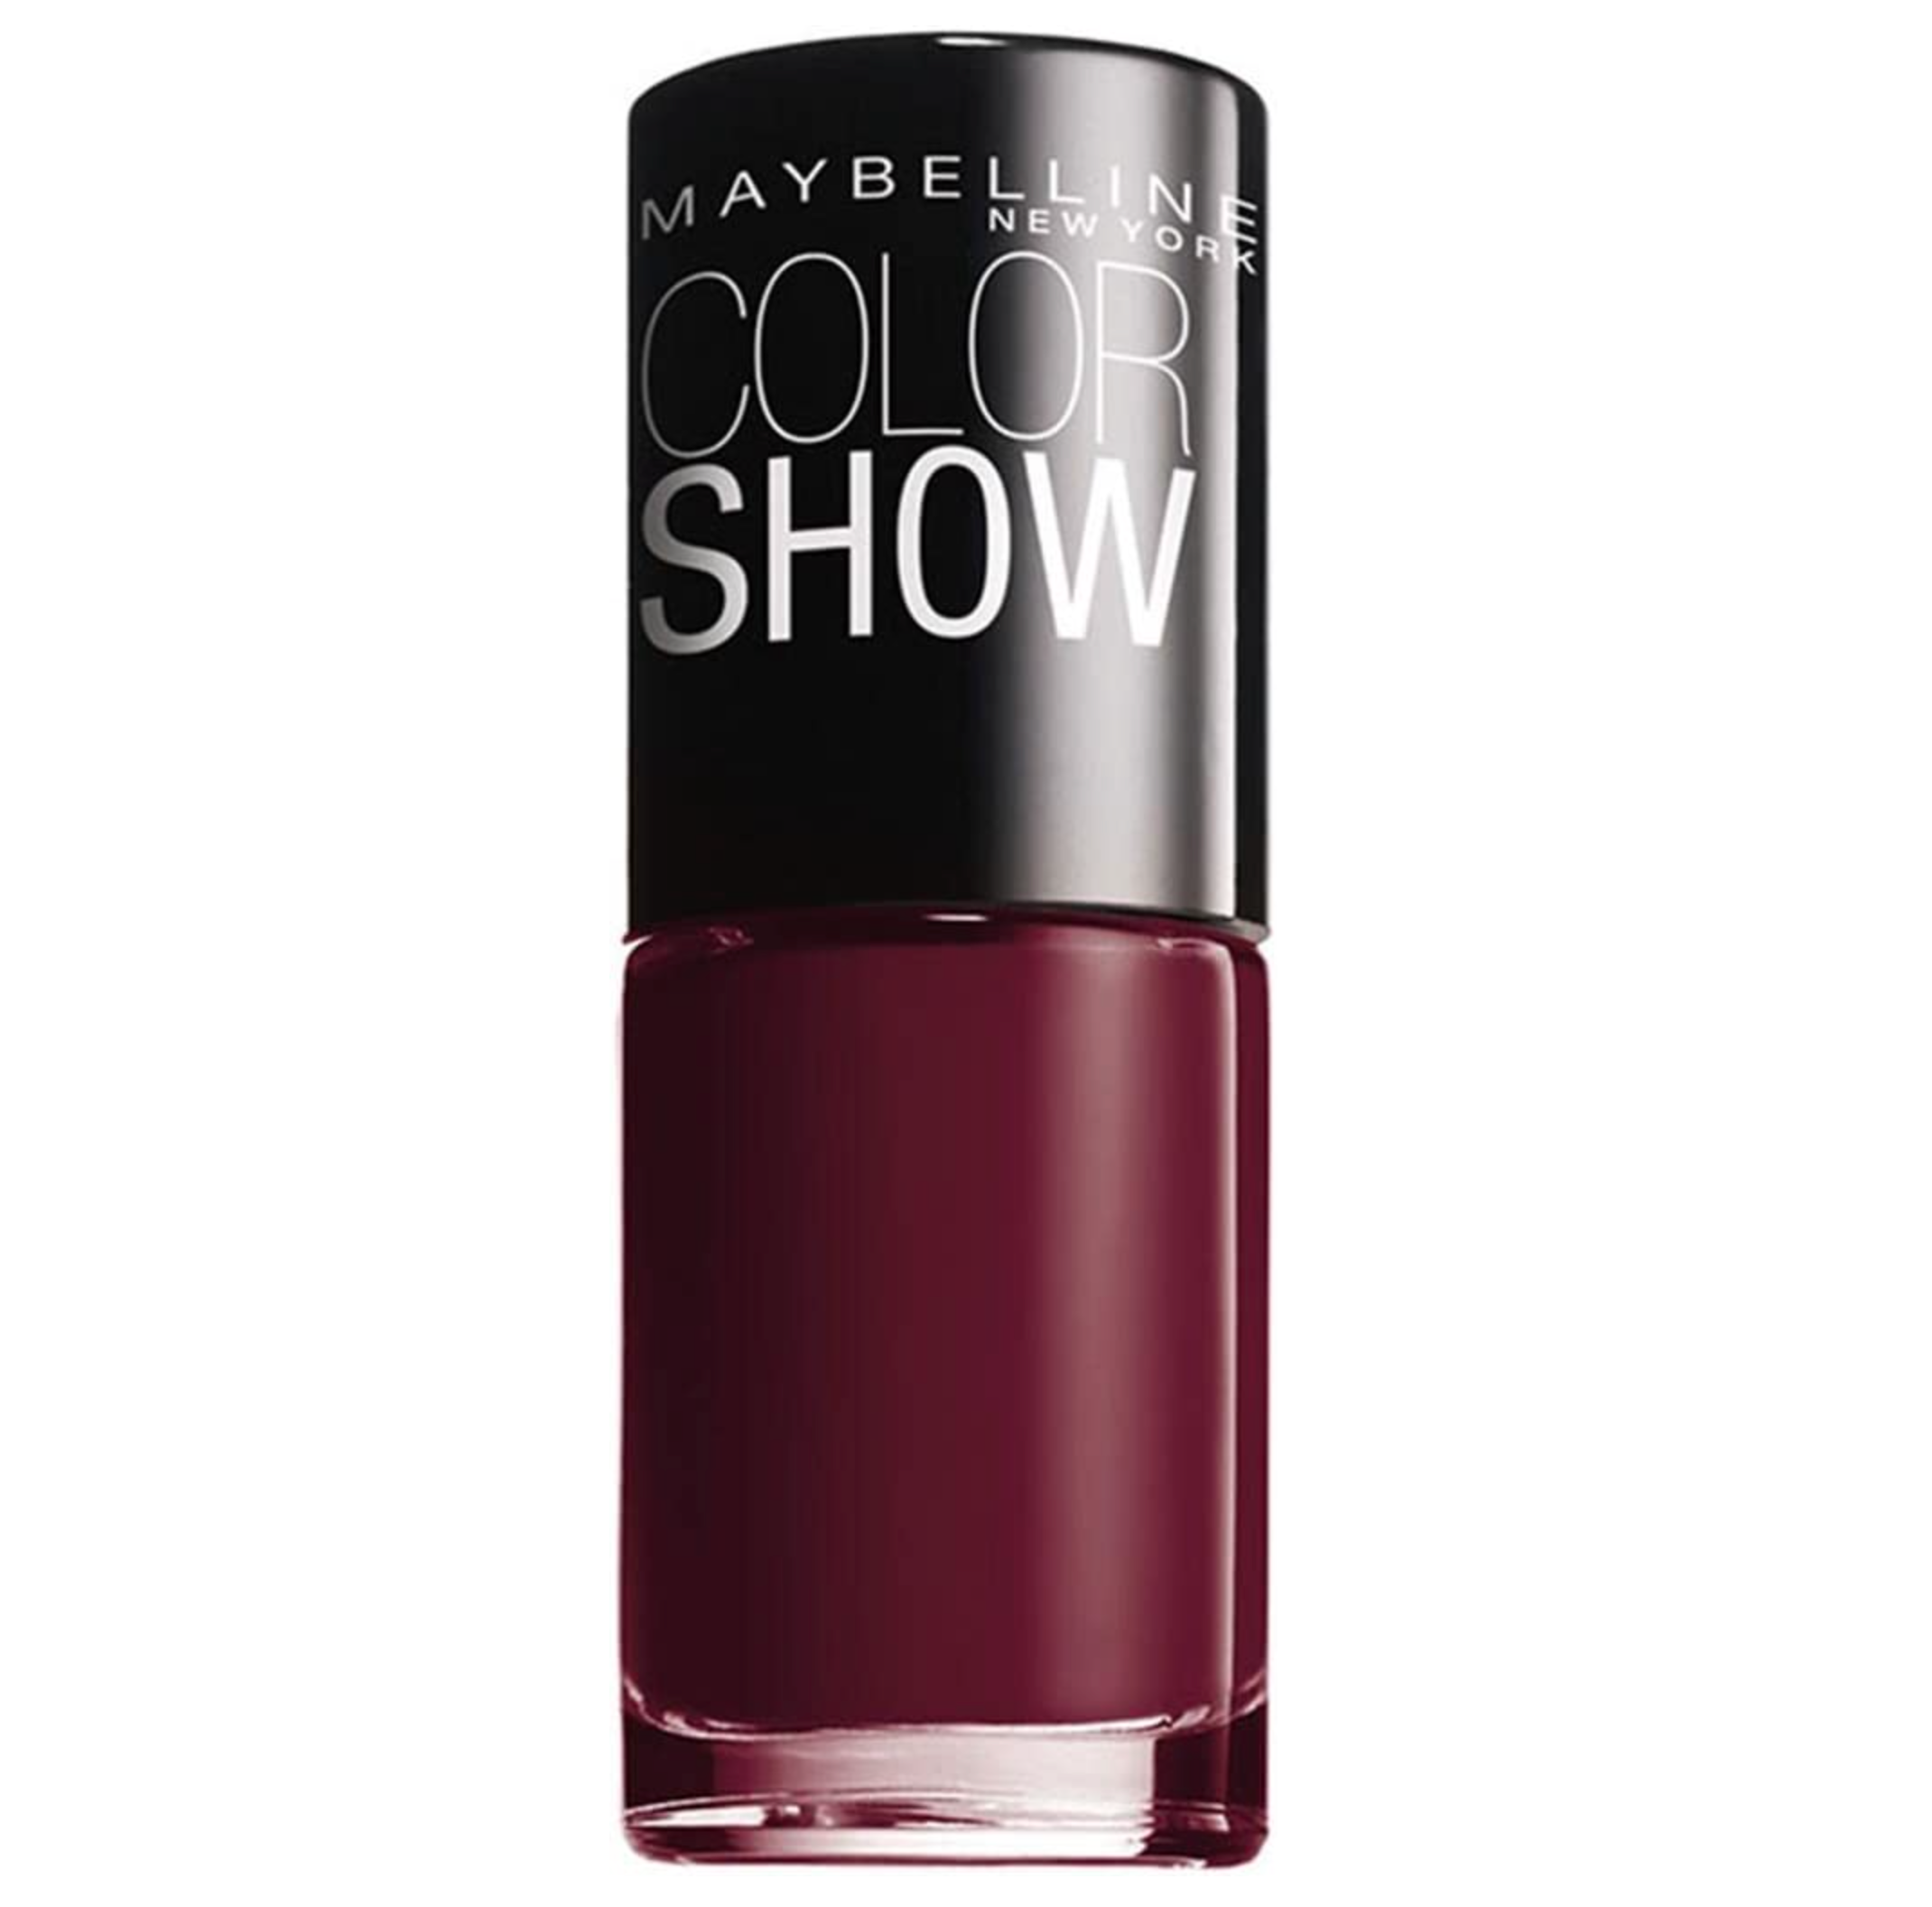 Maybelline Color Show Nail Polish - 352 Downtown Red